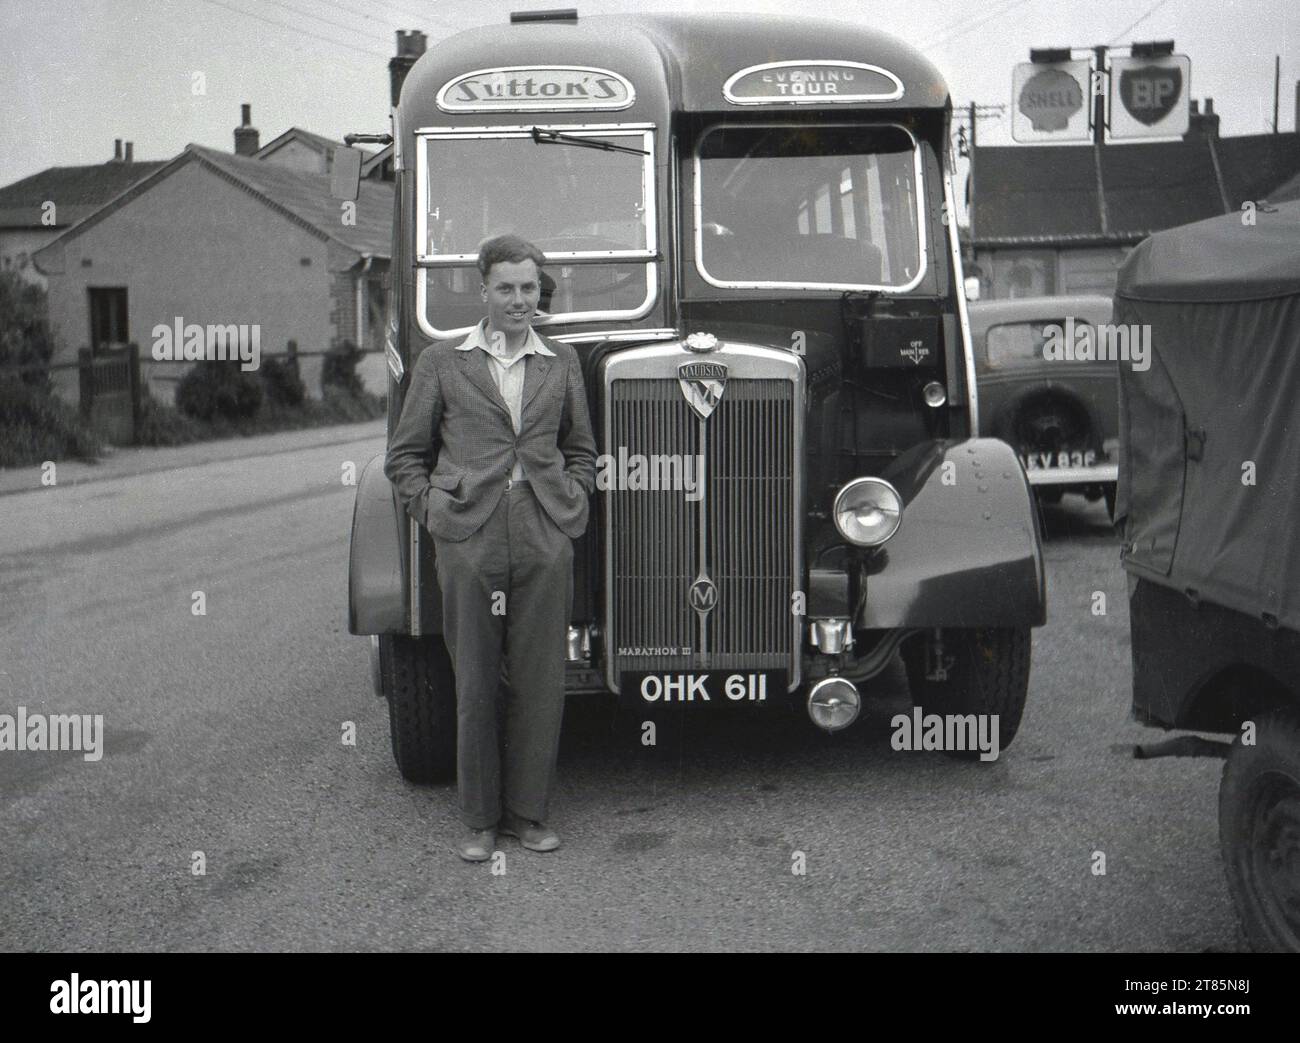 1950s, historical, outside a garage a man standing infront of a motor coach of the era, a Maudslay Marathon III operated by Sutton's, providing as the sign says, An Evening Tour.  Before overseas package holidays in the late 1960s and 70s, in Britain people travelled to holiday destinations by coach and buses which distinctive and stylish body designs. The 1950s are considered the 'golden age' of coach travel. Stock Photo